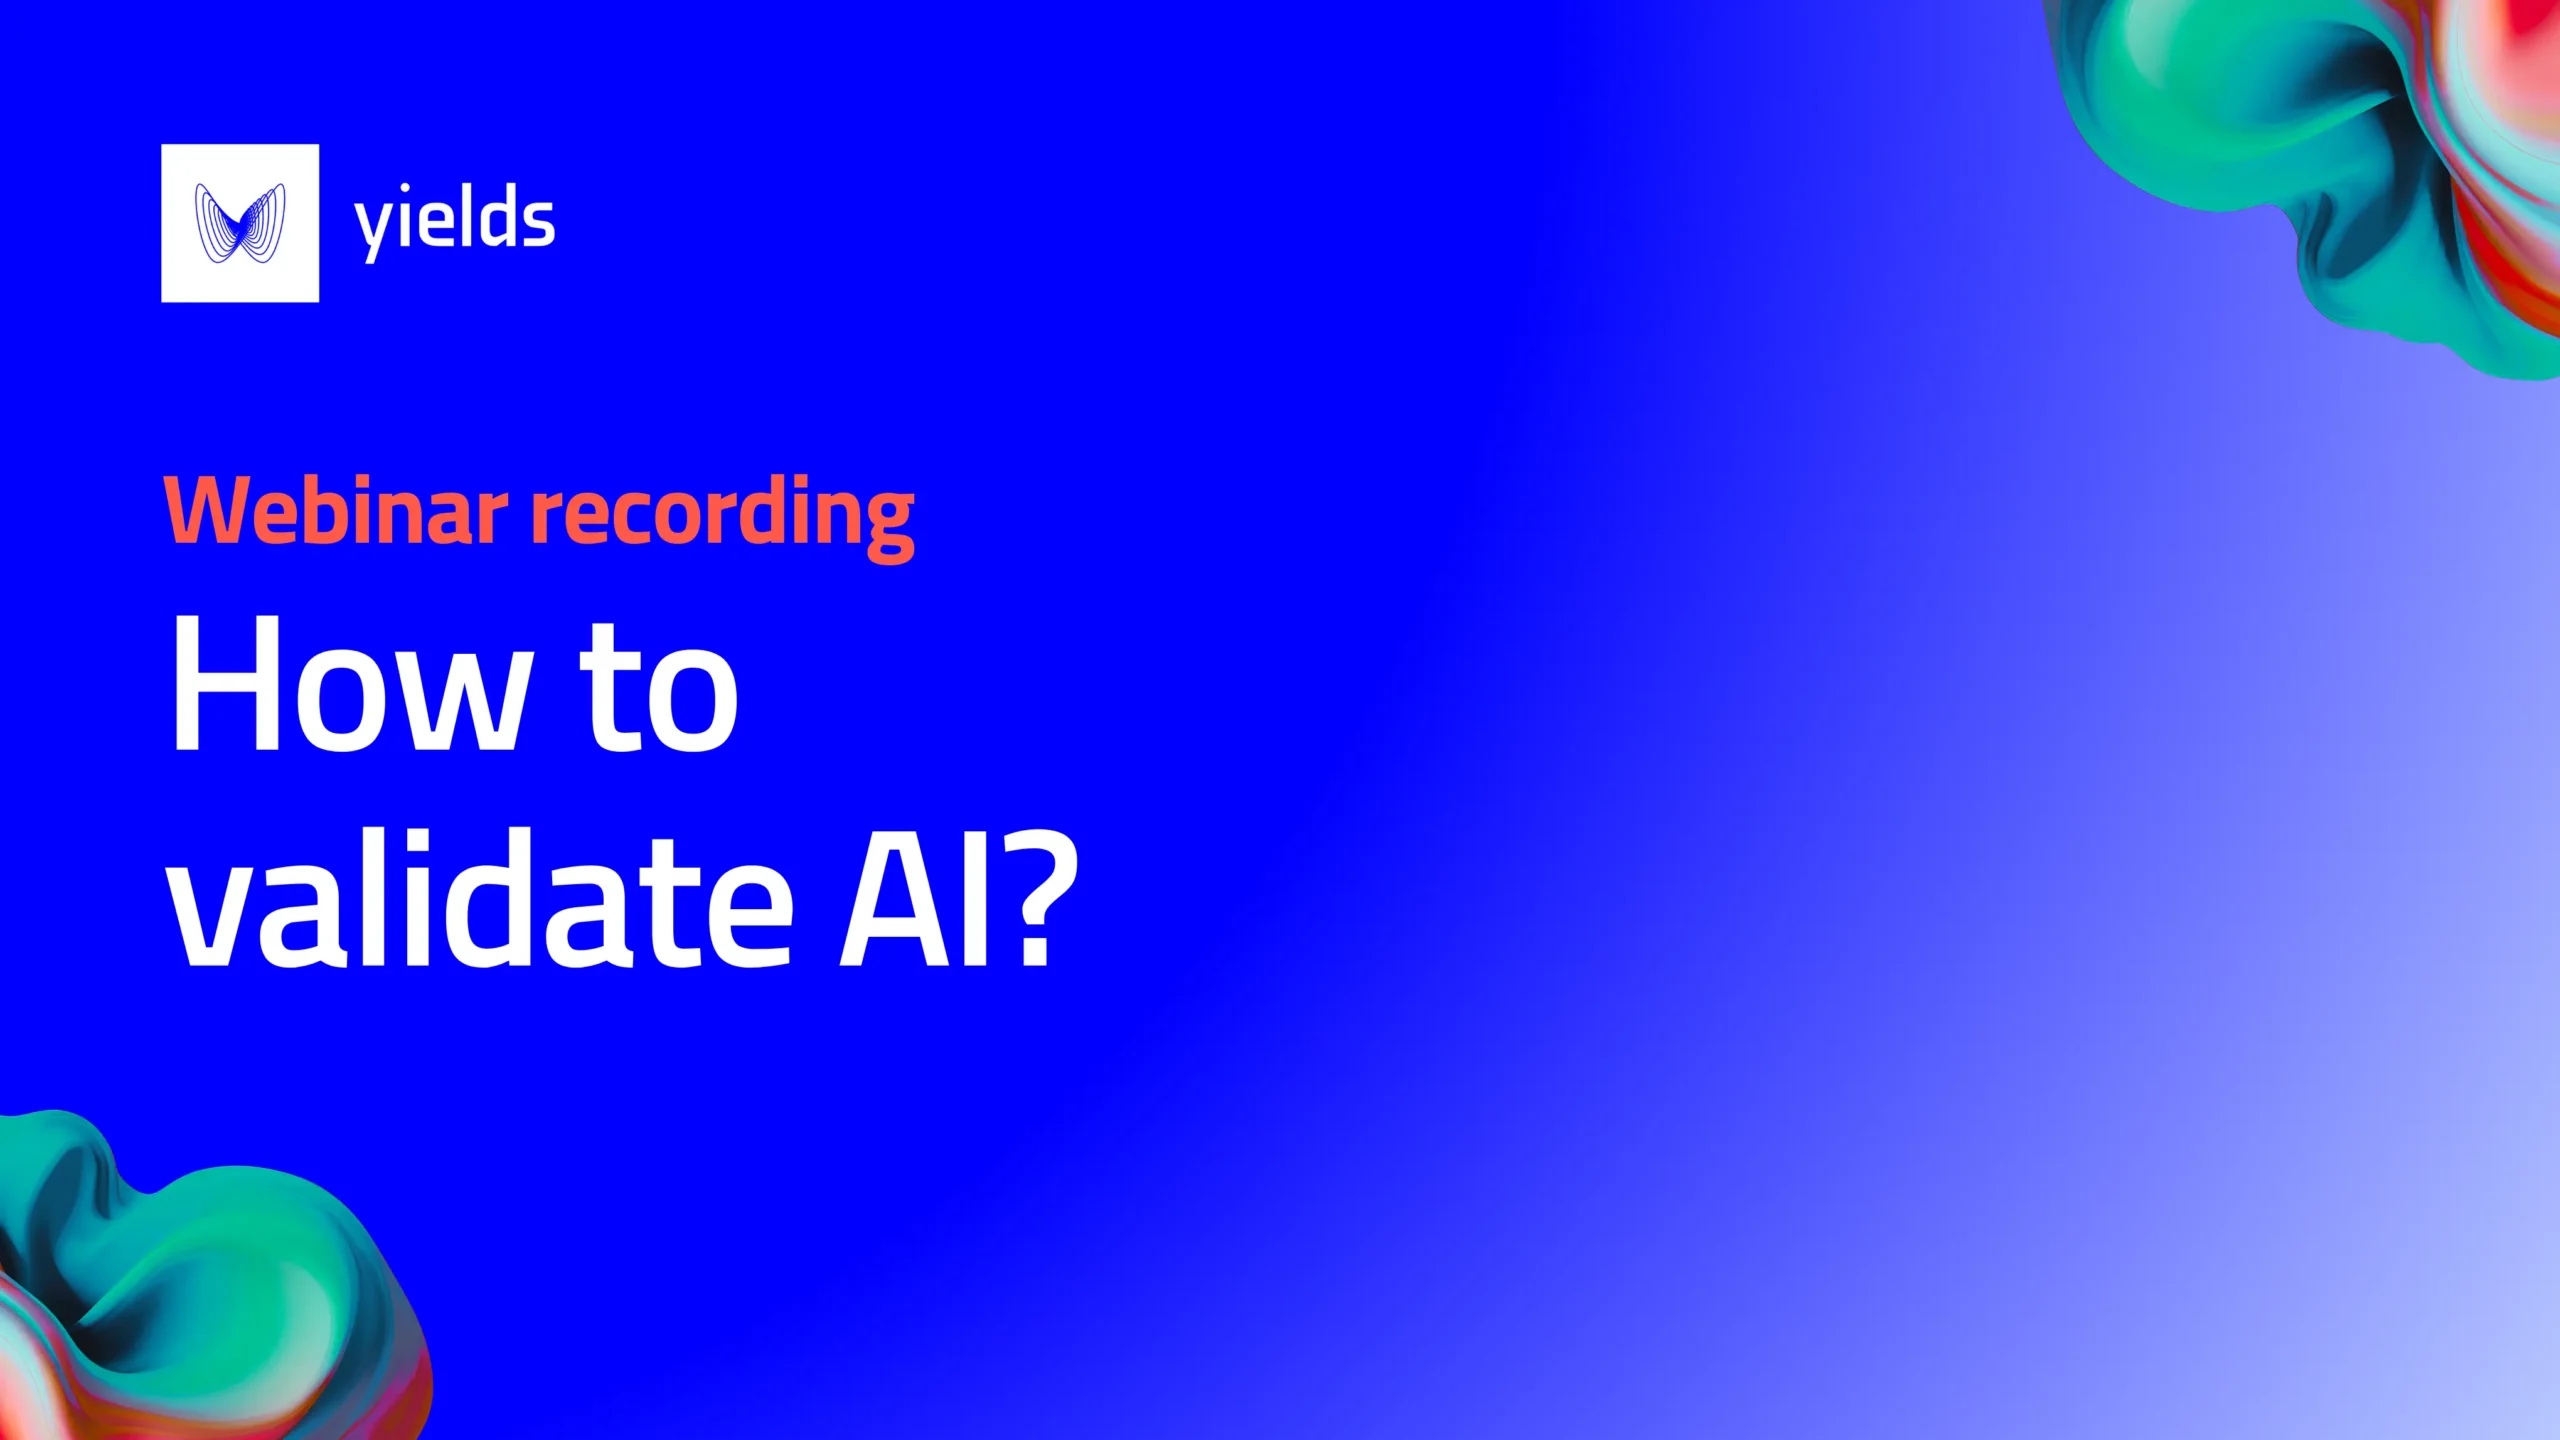 How to validate AI?